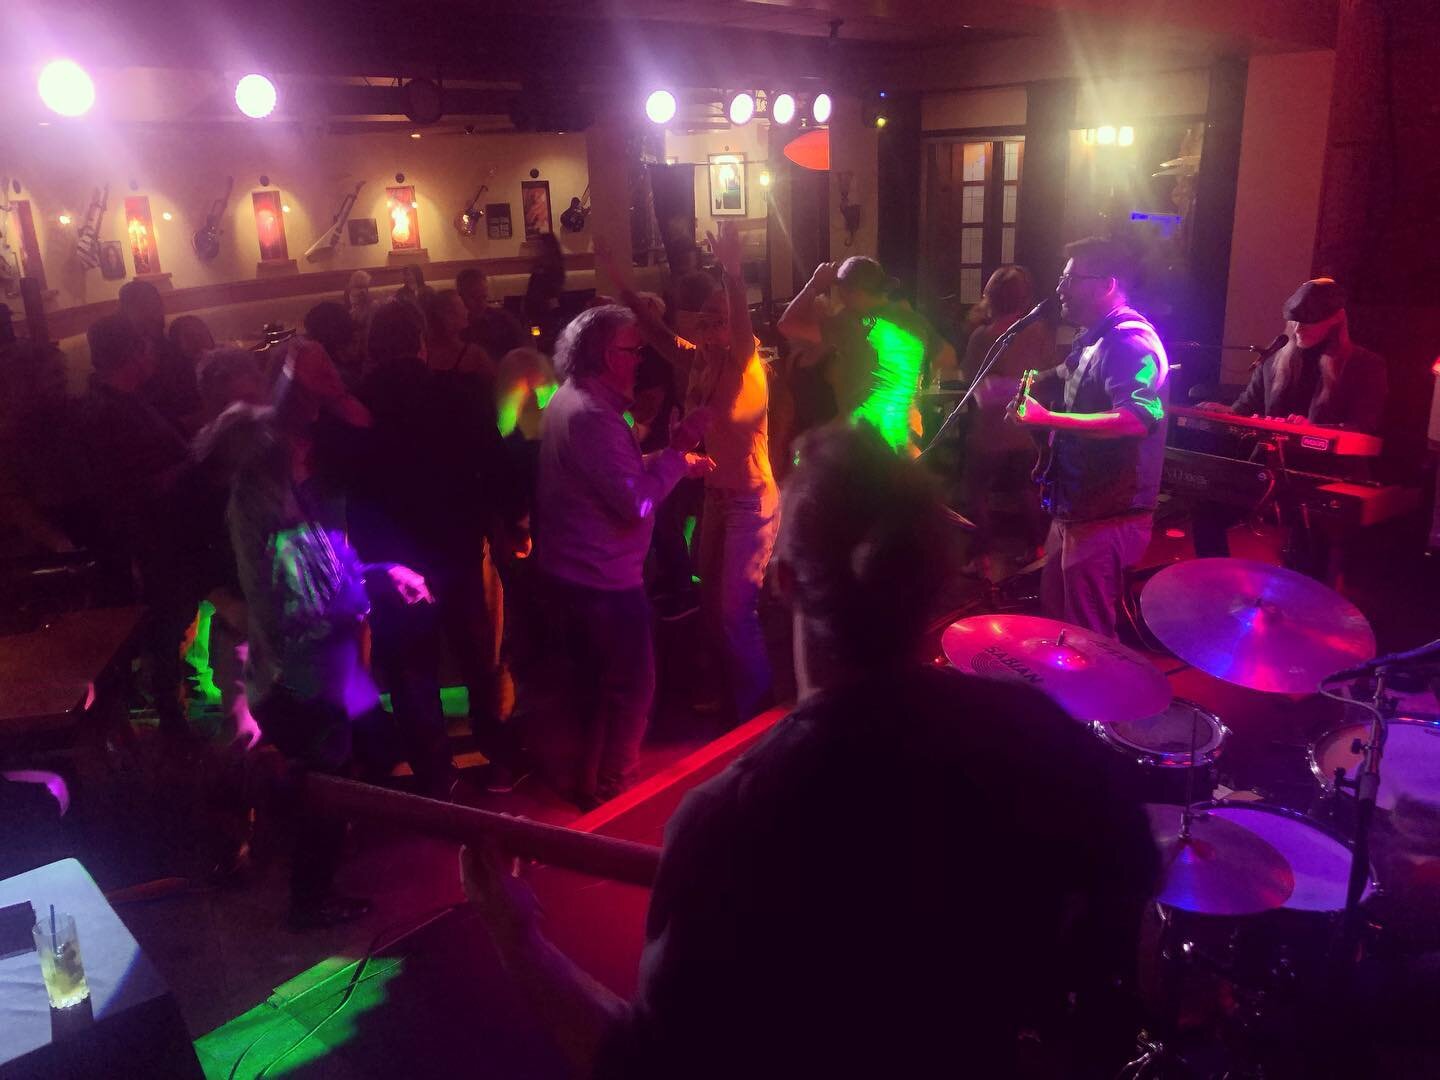 Booking a band? Sedona Audio is trusted by several local performers and venues for high quality sound that is sure to impress your guests.